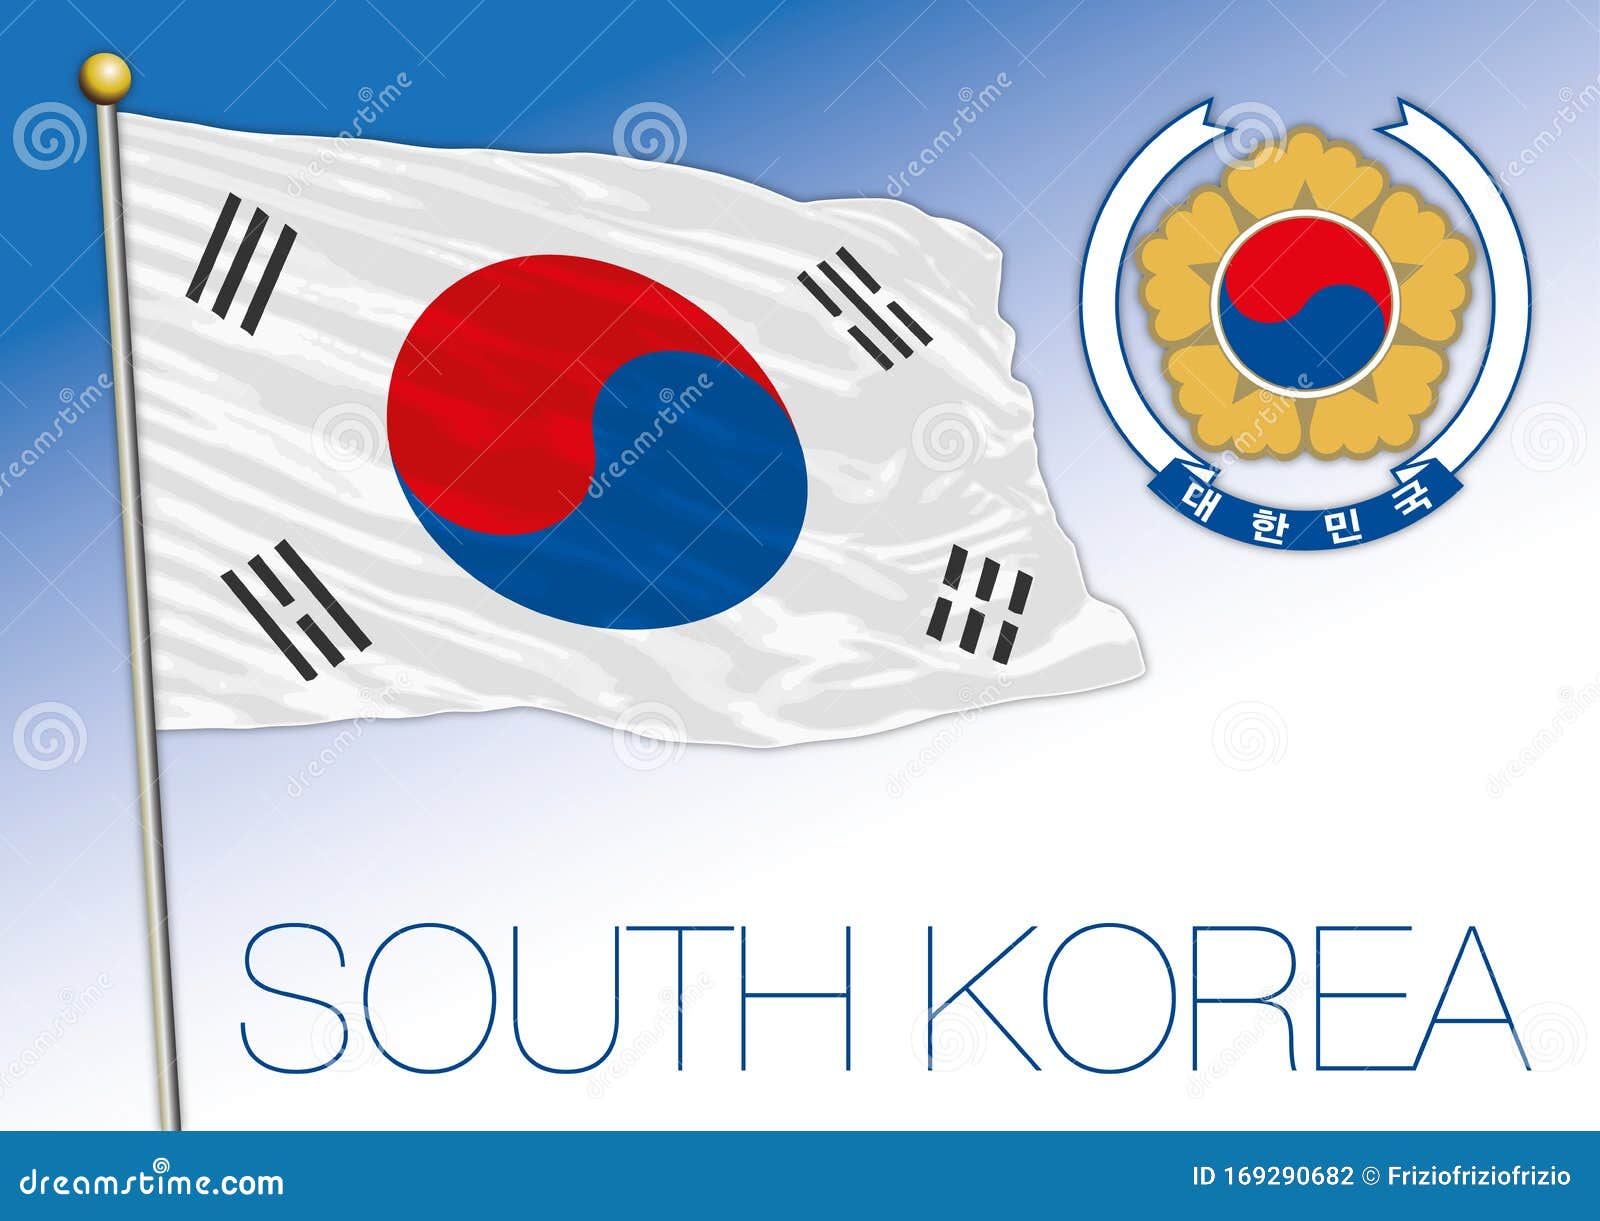 South Korea Official National Flag And Coat Of Arms Stock Vector -  Illustration Of Building, Modern: 169290682